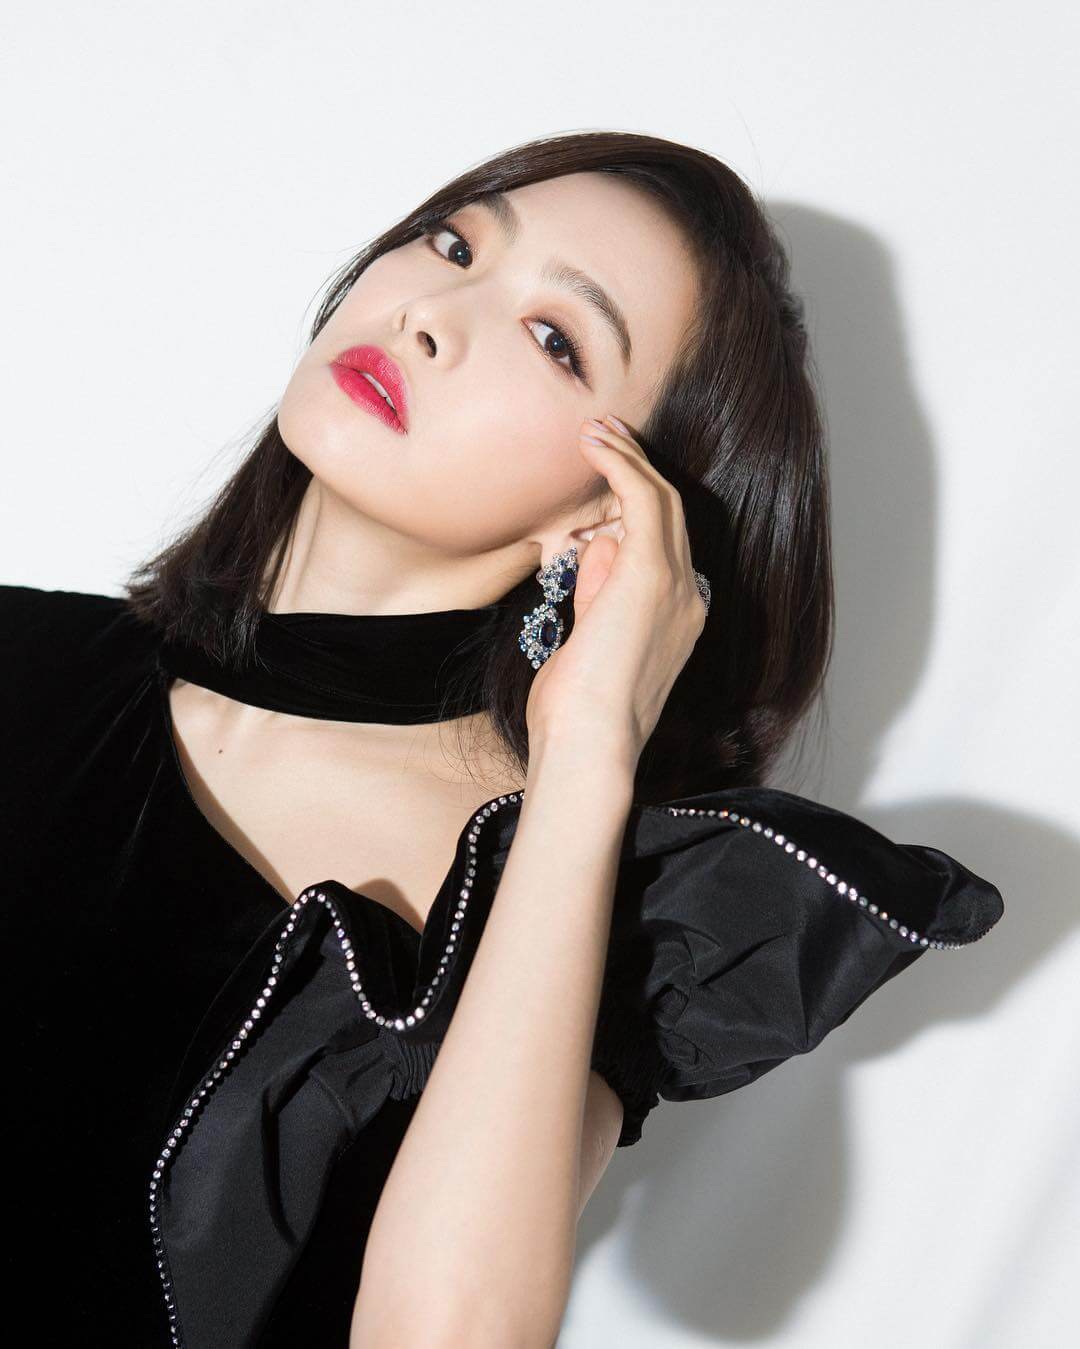 The Hottest Photo Of Victoria Song